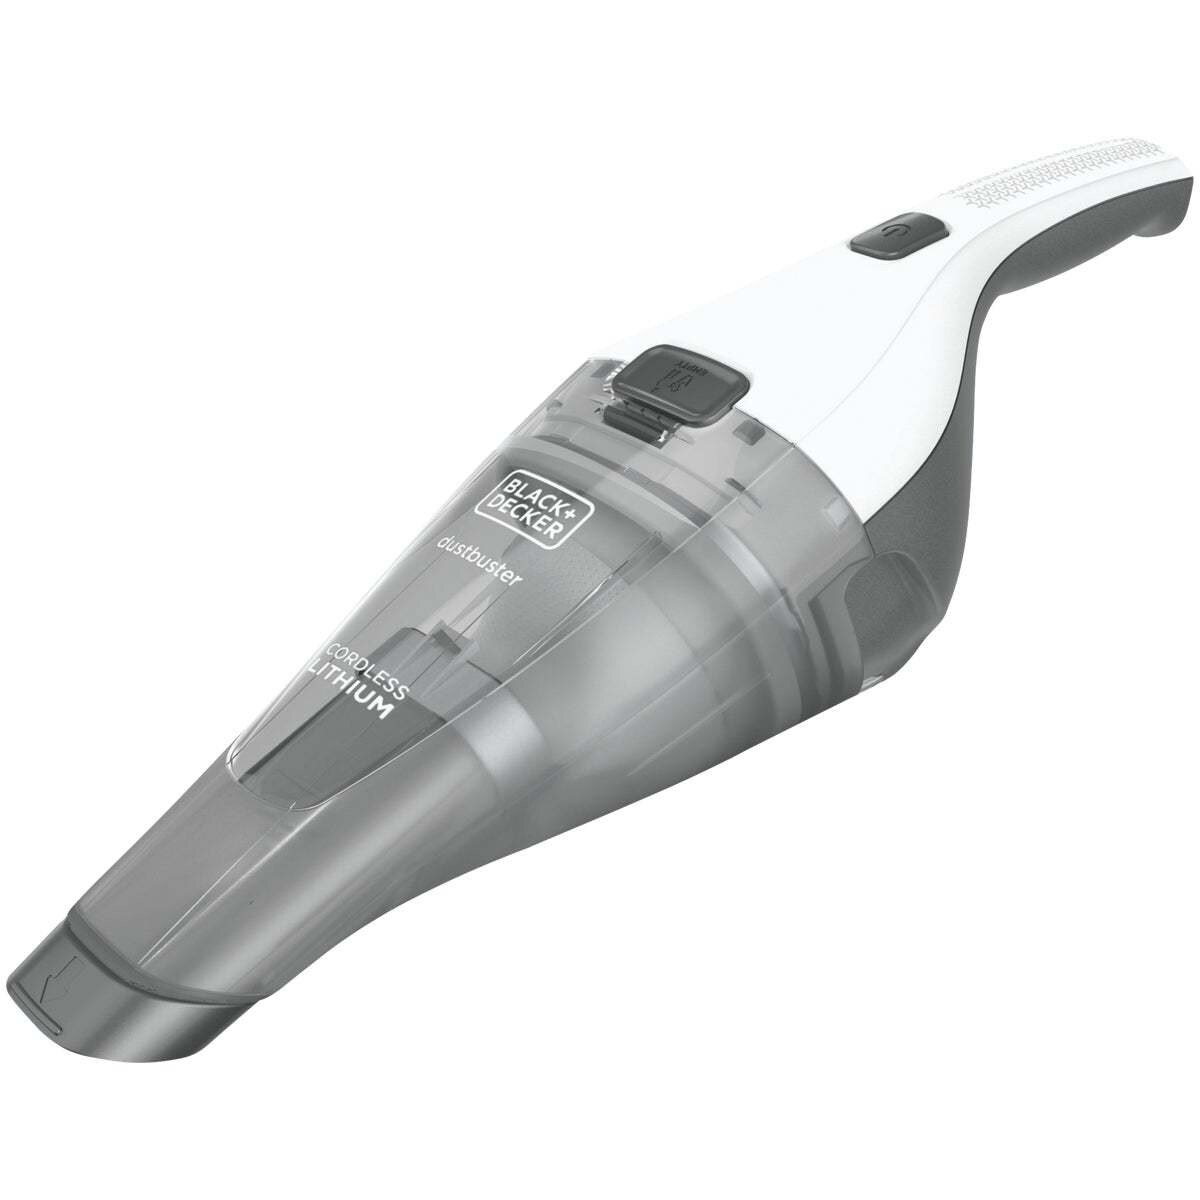 https://ak1.ostkcdn.com/images/products/is/images/direct/3b181d1b2774e4a1b567d4277c94f48a7c0e16dd/Black-%26-Decker-Dustbuster-7.2V-1.5AH-White-Cordless-Handheld-Vacuum-Cleaner---1-Each.jpg